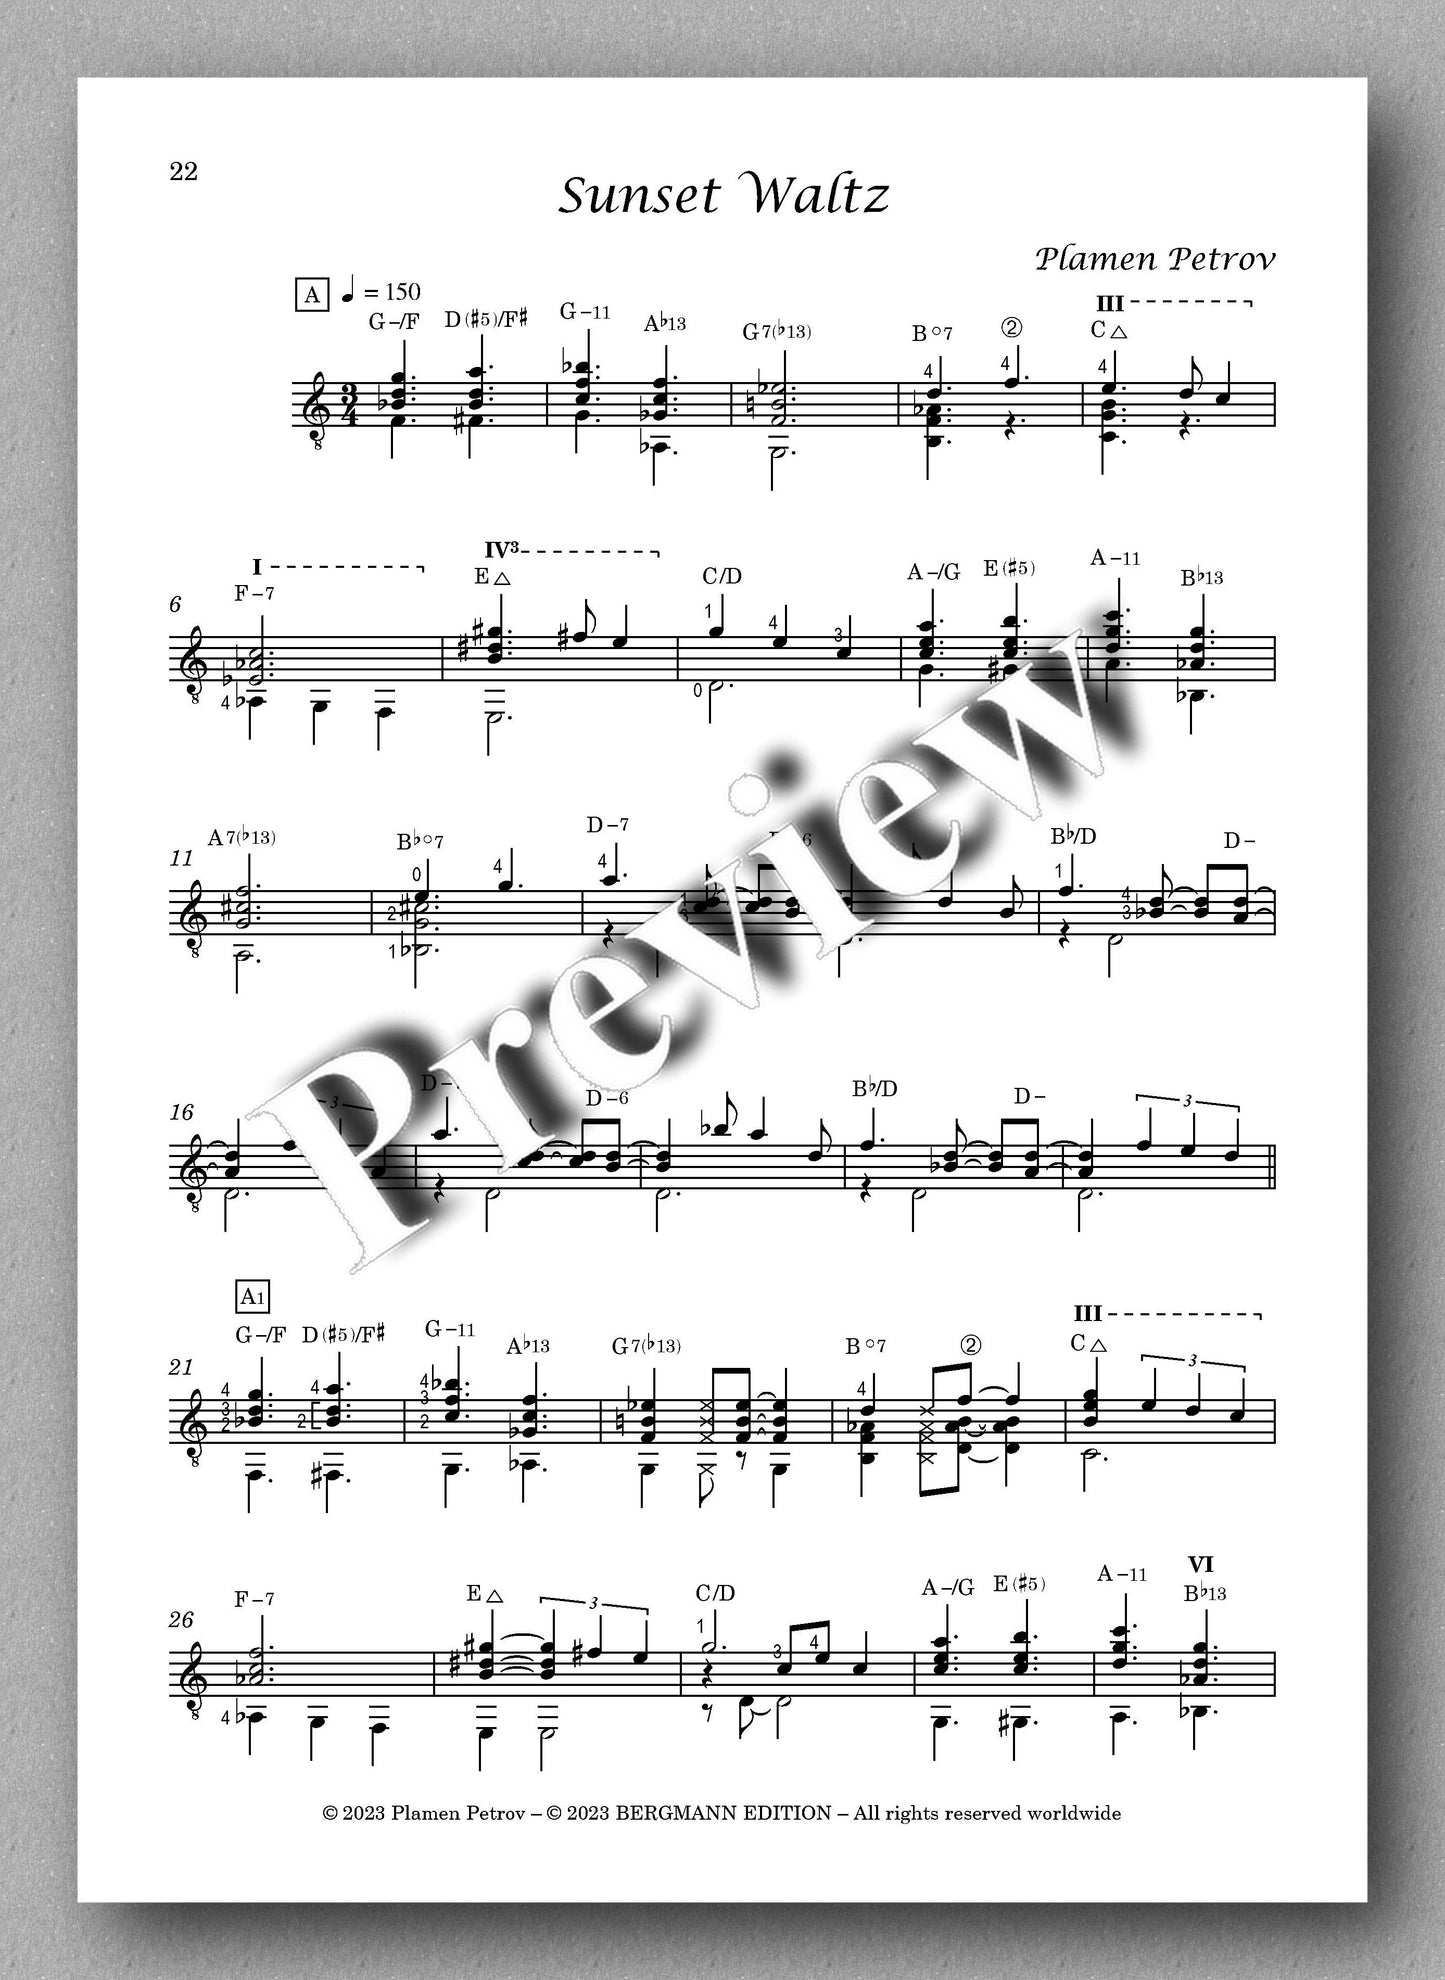 "When You’re Waiting for Me", by Plamen Petrov - preview of the Music score 5